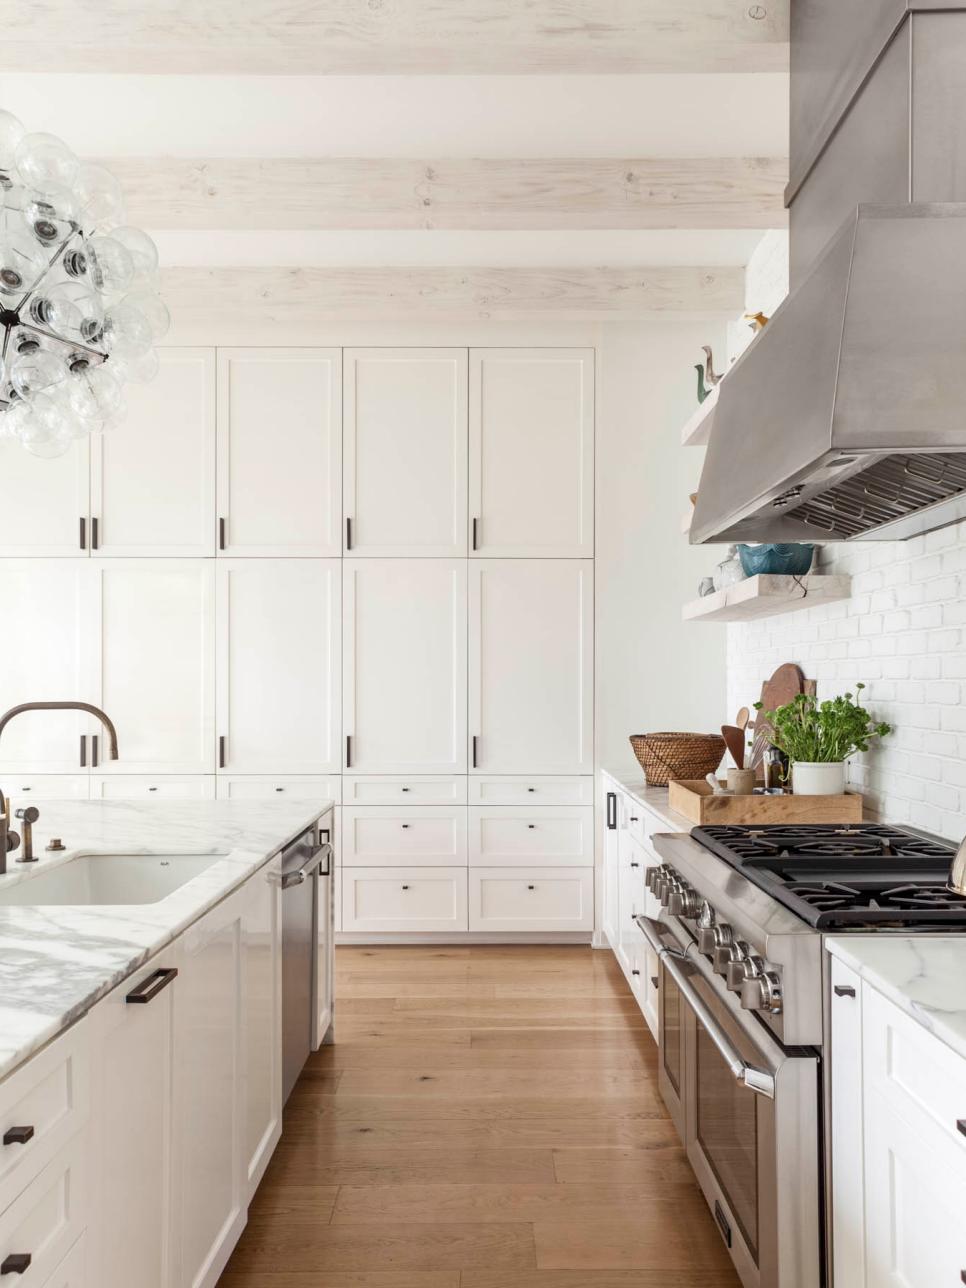 Bright Transitional Kitchen With Floor-to-ceiling White Cabinets | HGTV